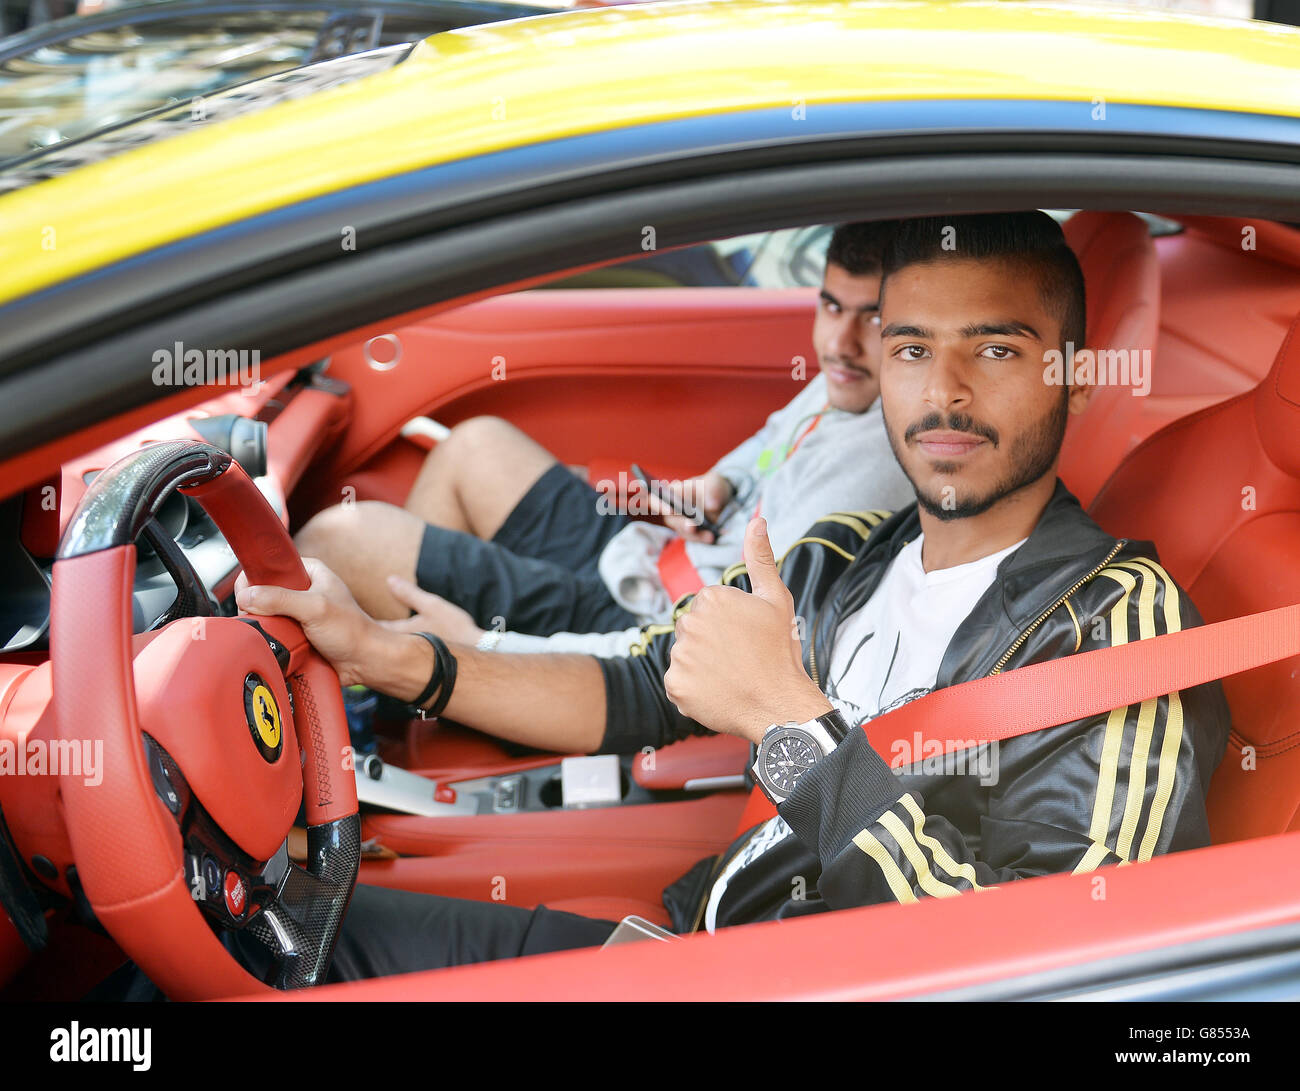 Fahad from Saudi Arabia, sits in his parked black and yellow Ferrari close to Harrods department store in Knightsbridge central London. Stock Photo